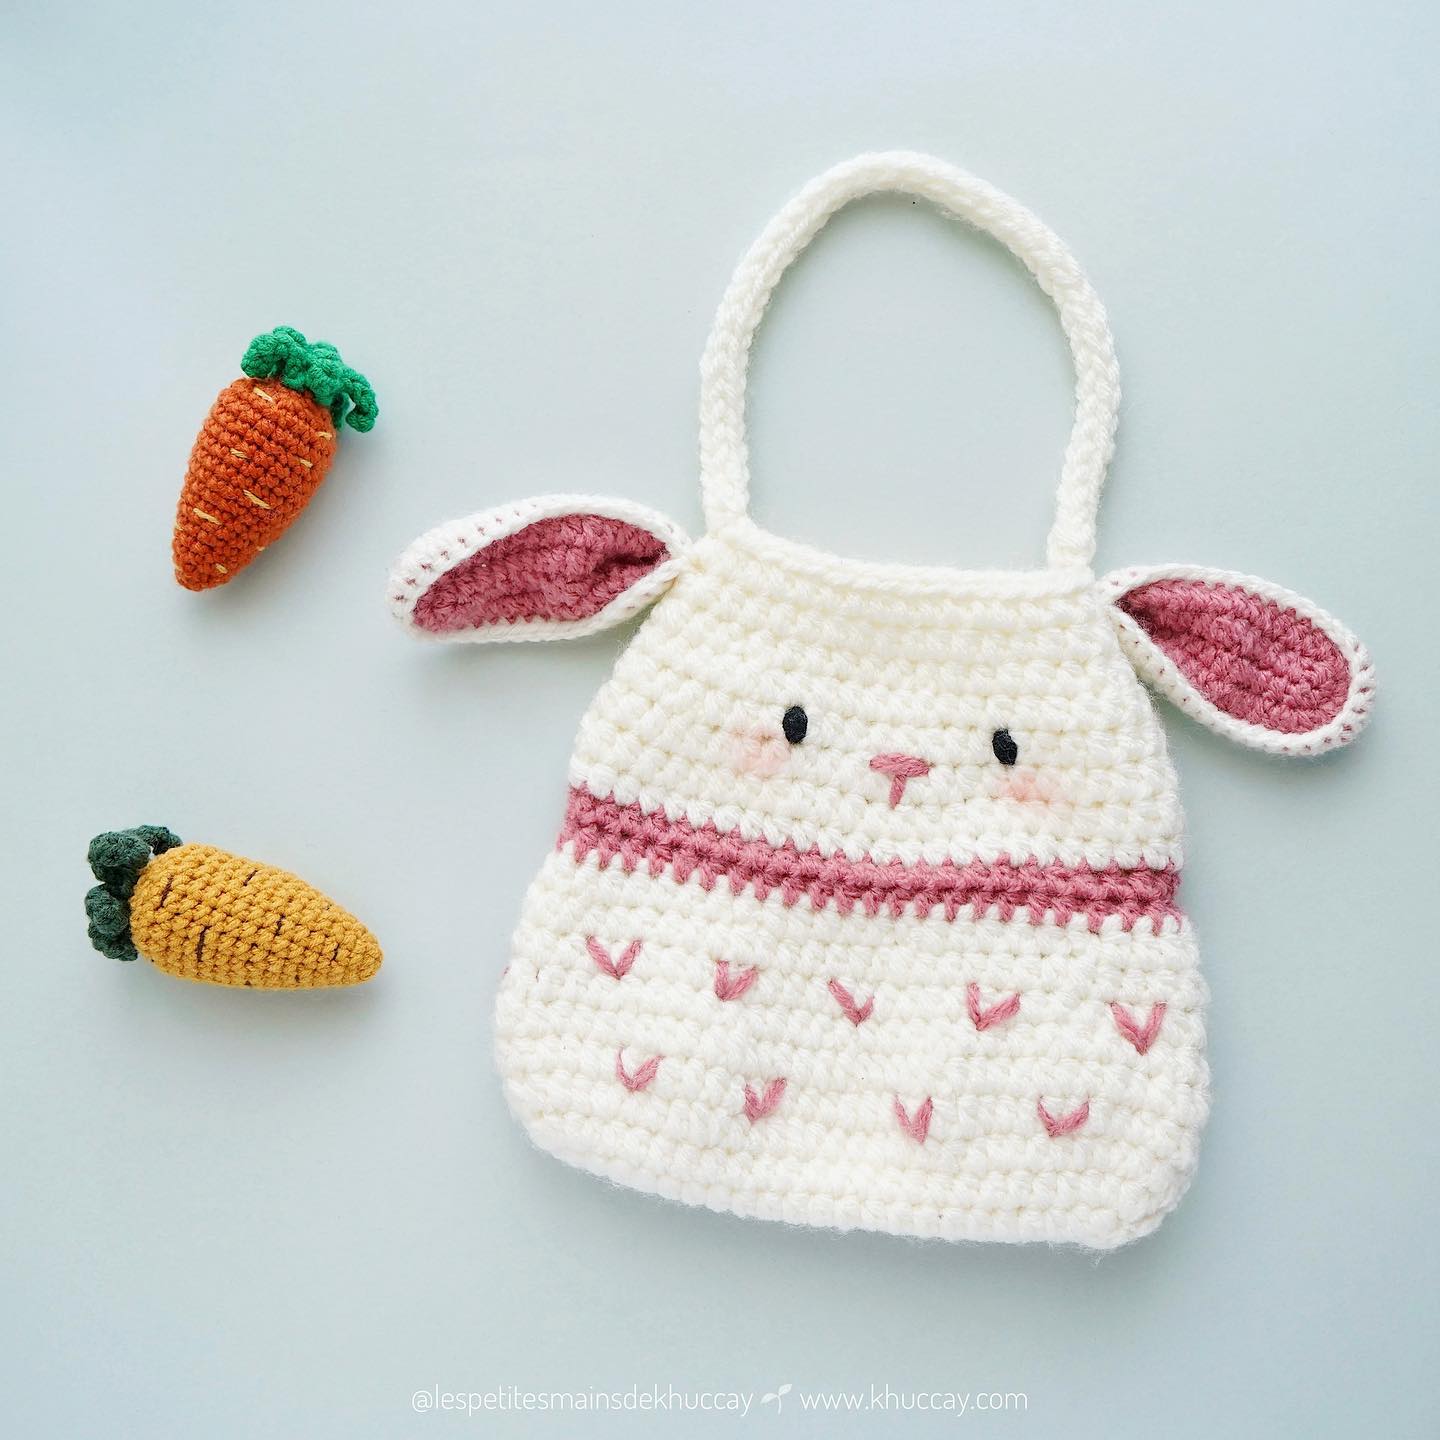 FREE Crochet Pattern - Little bunny bag🐰
Do not hesitate to check out my blog www.Khuccay.com for some free crochet patterns which are quick and easy to make, beginner-friendly! Promise I’ll be back soon with a new one ☺️ 
I also add the tutorial video of the crochet i-cord on my YouTube channel, this technique is quite popular for making straps of crochet bags. Let’s check it out 😘 (link in my bio)
Have a nice week my friends!